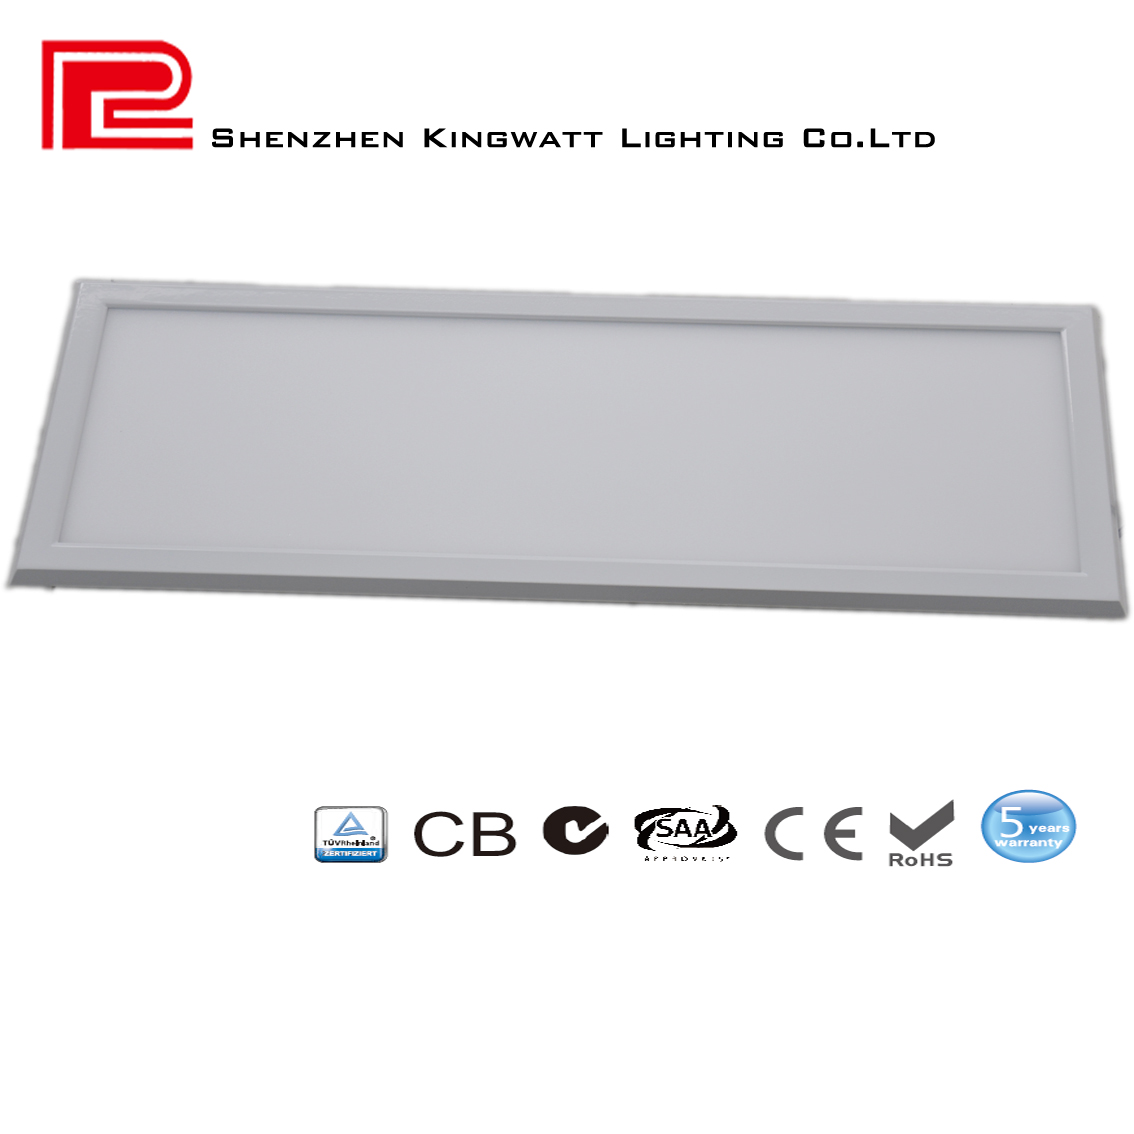 CB/CTEL/SAA/RoHS 100Lm/W LED Panel Light，620mm*620mm with 55W 